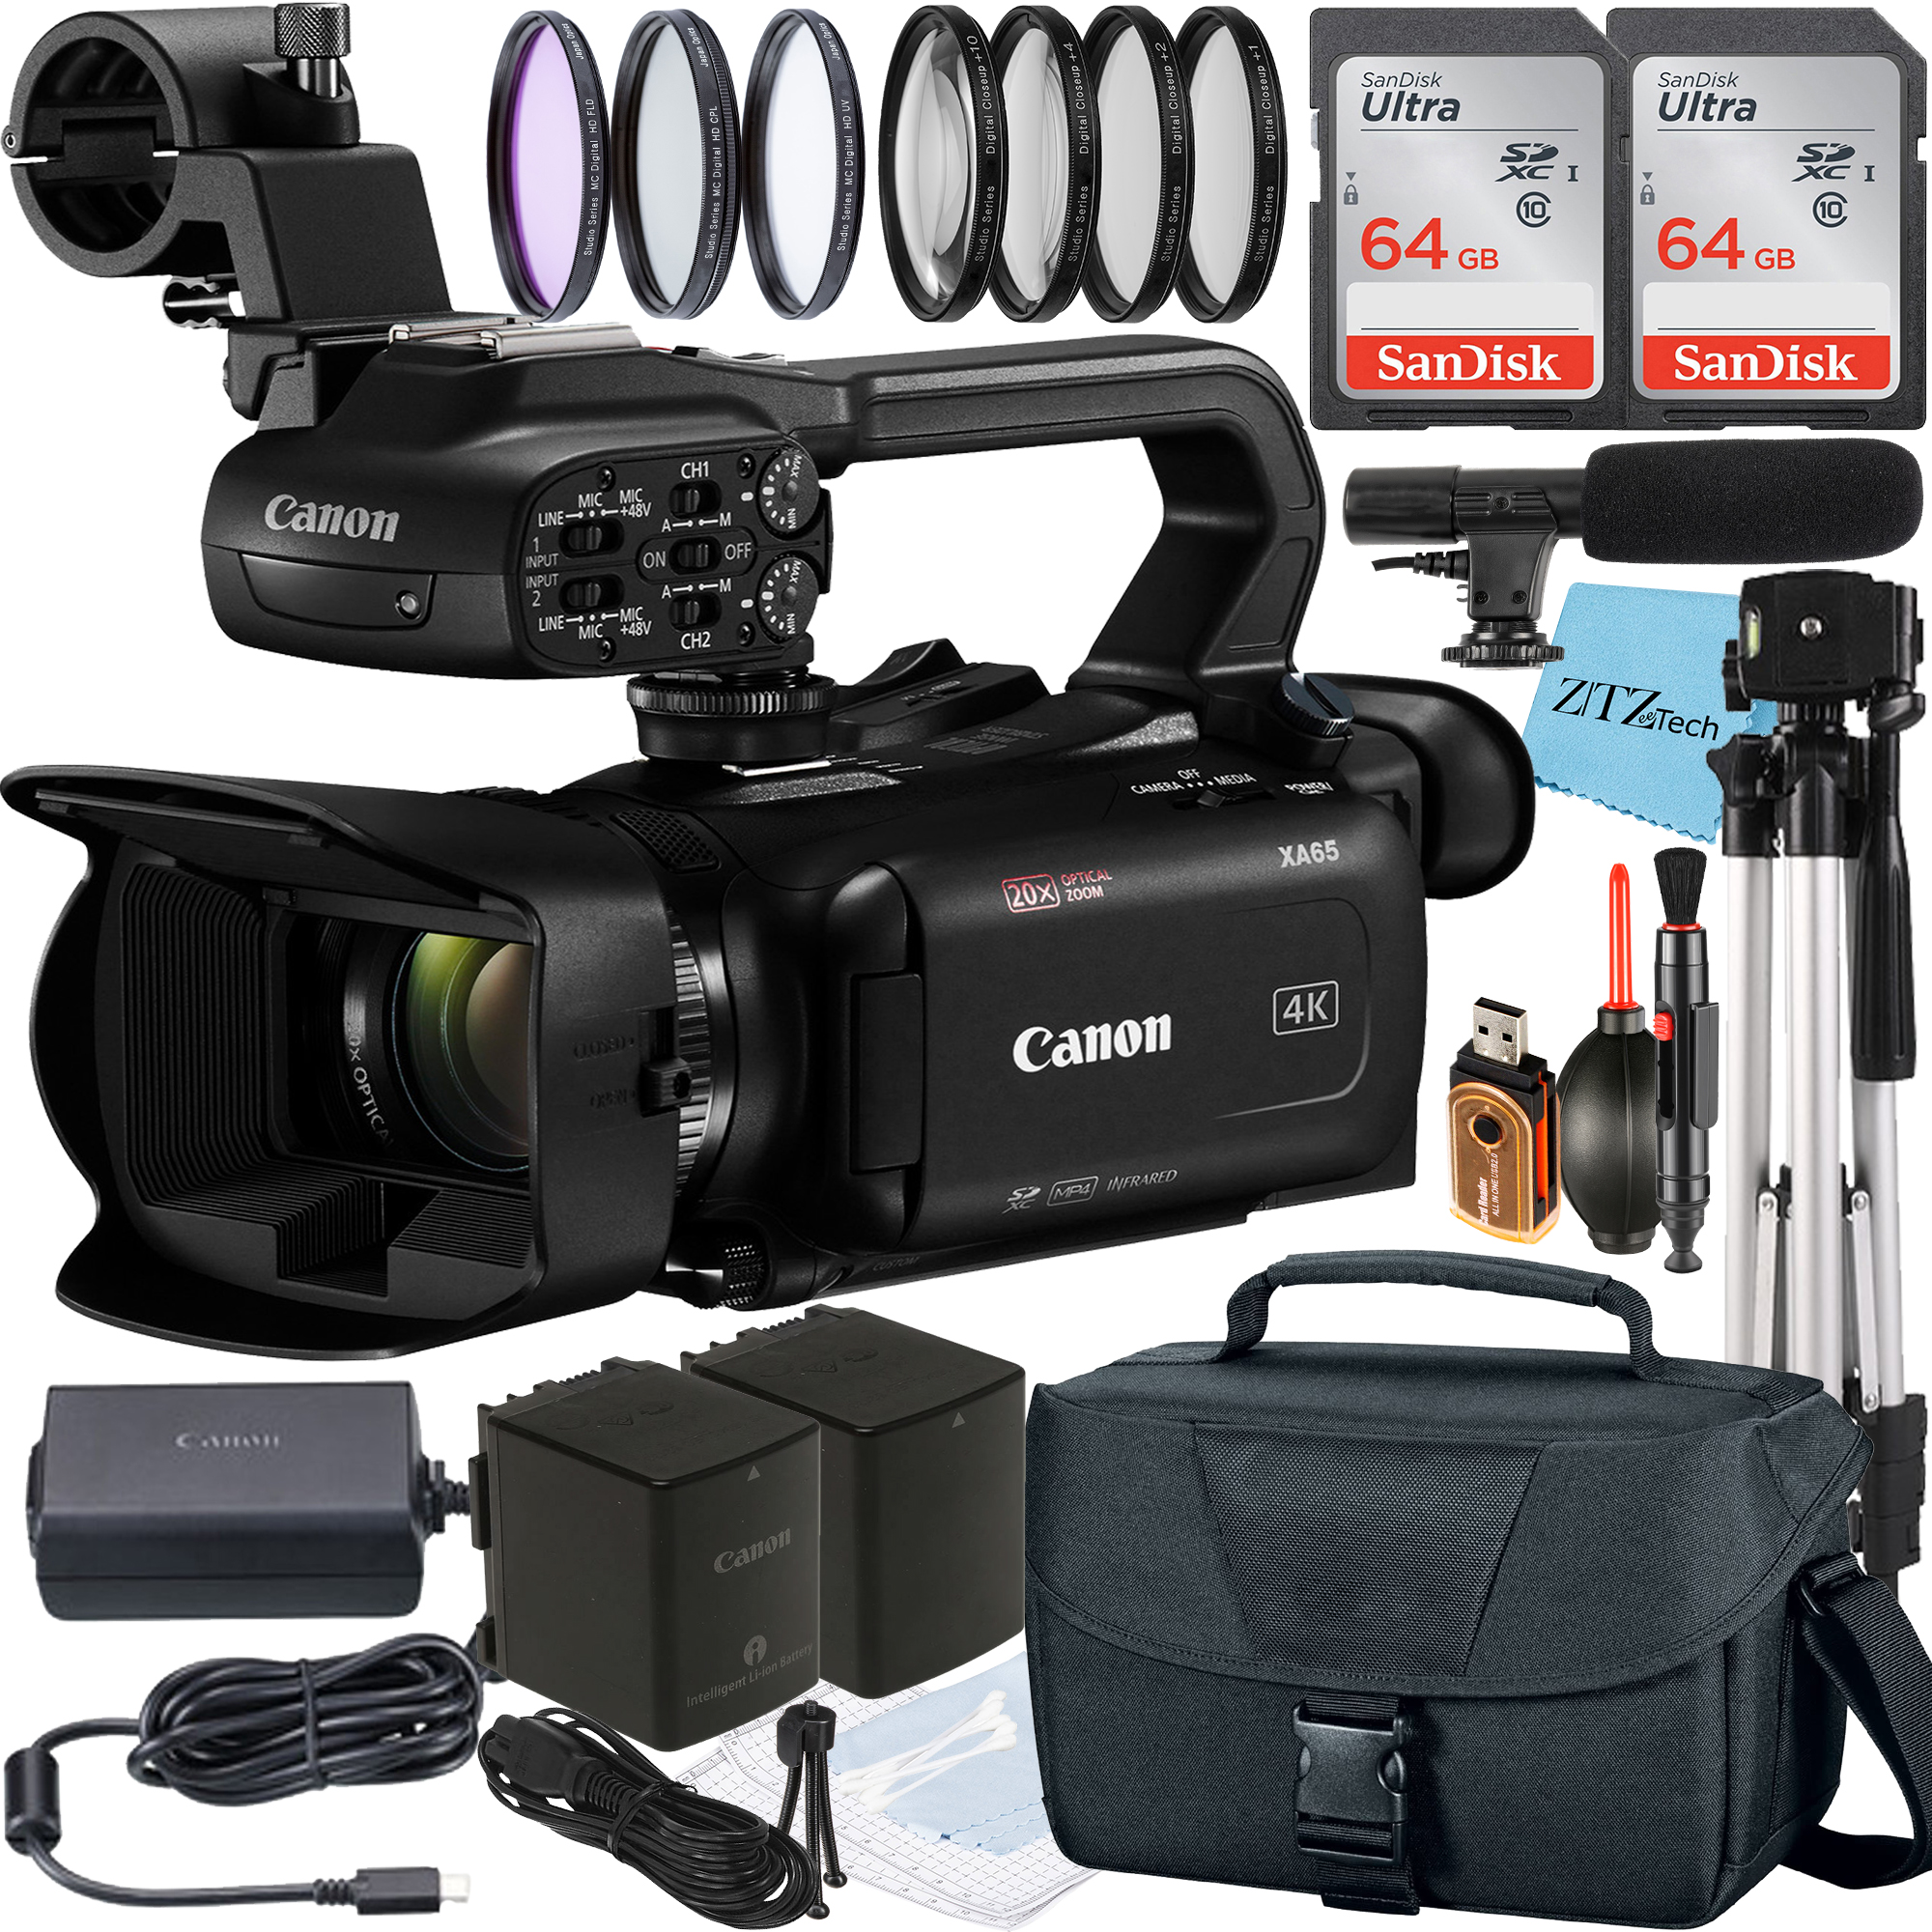 Canon XA65 Professional UHD 4K Camcorder with 2 Pack SanDisk 64GB Memory Card + Case + Tripod + Filter Kit + Microphone + ZeeTech Accessory Bundle